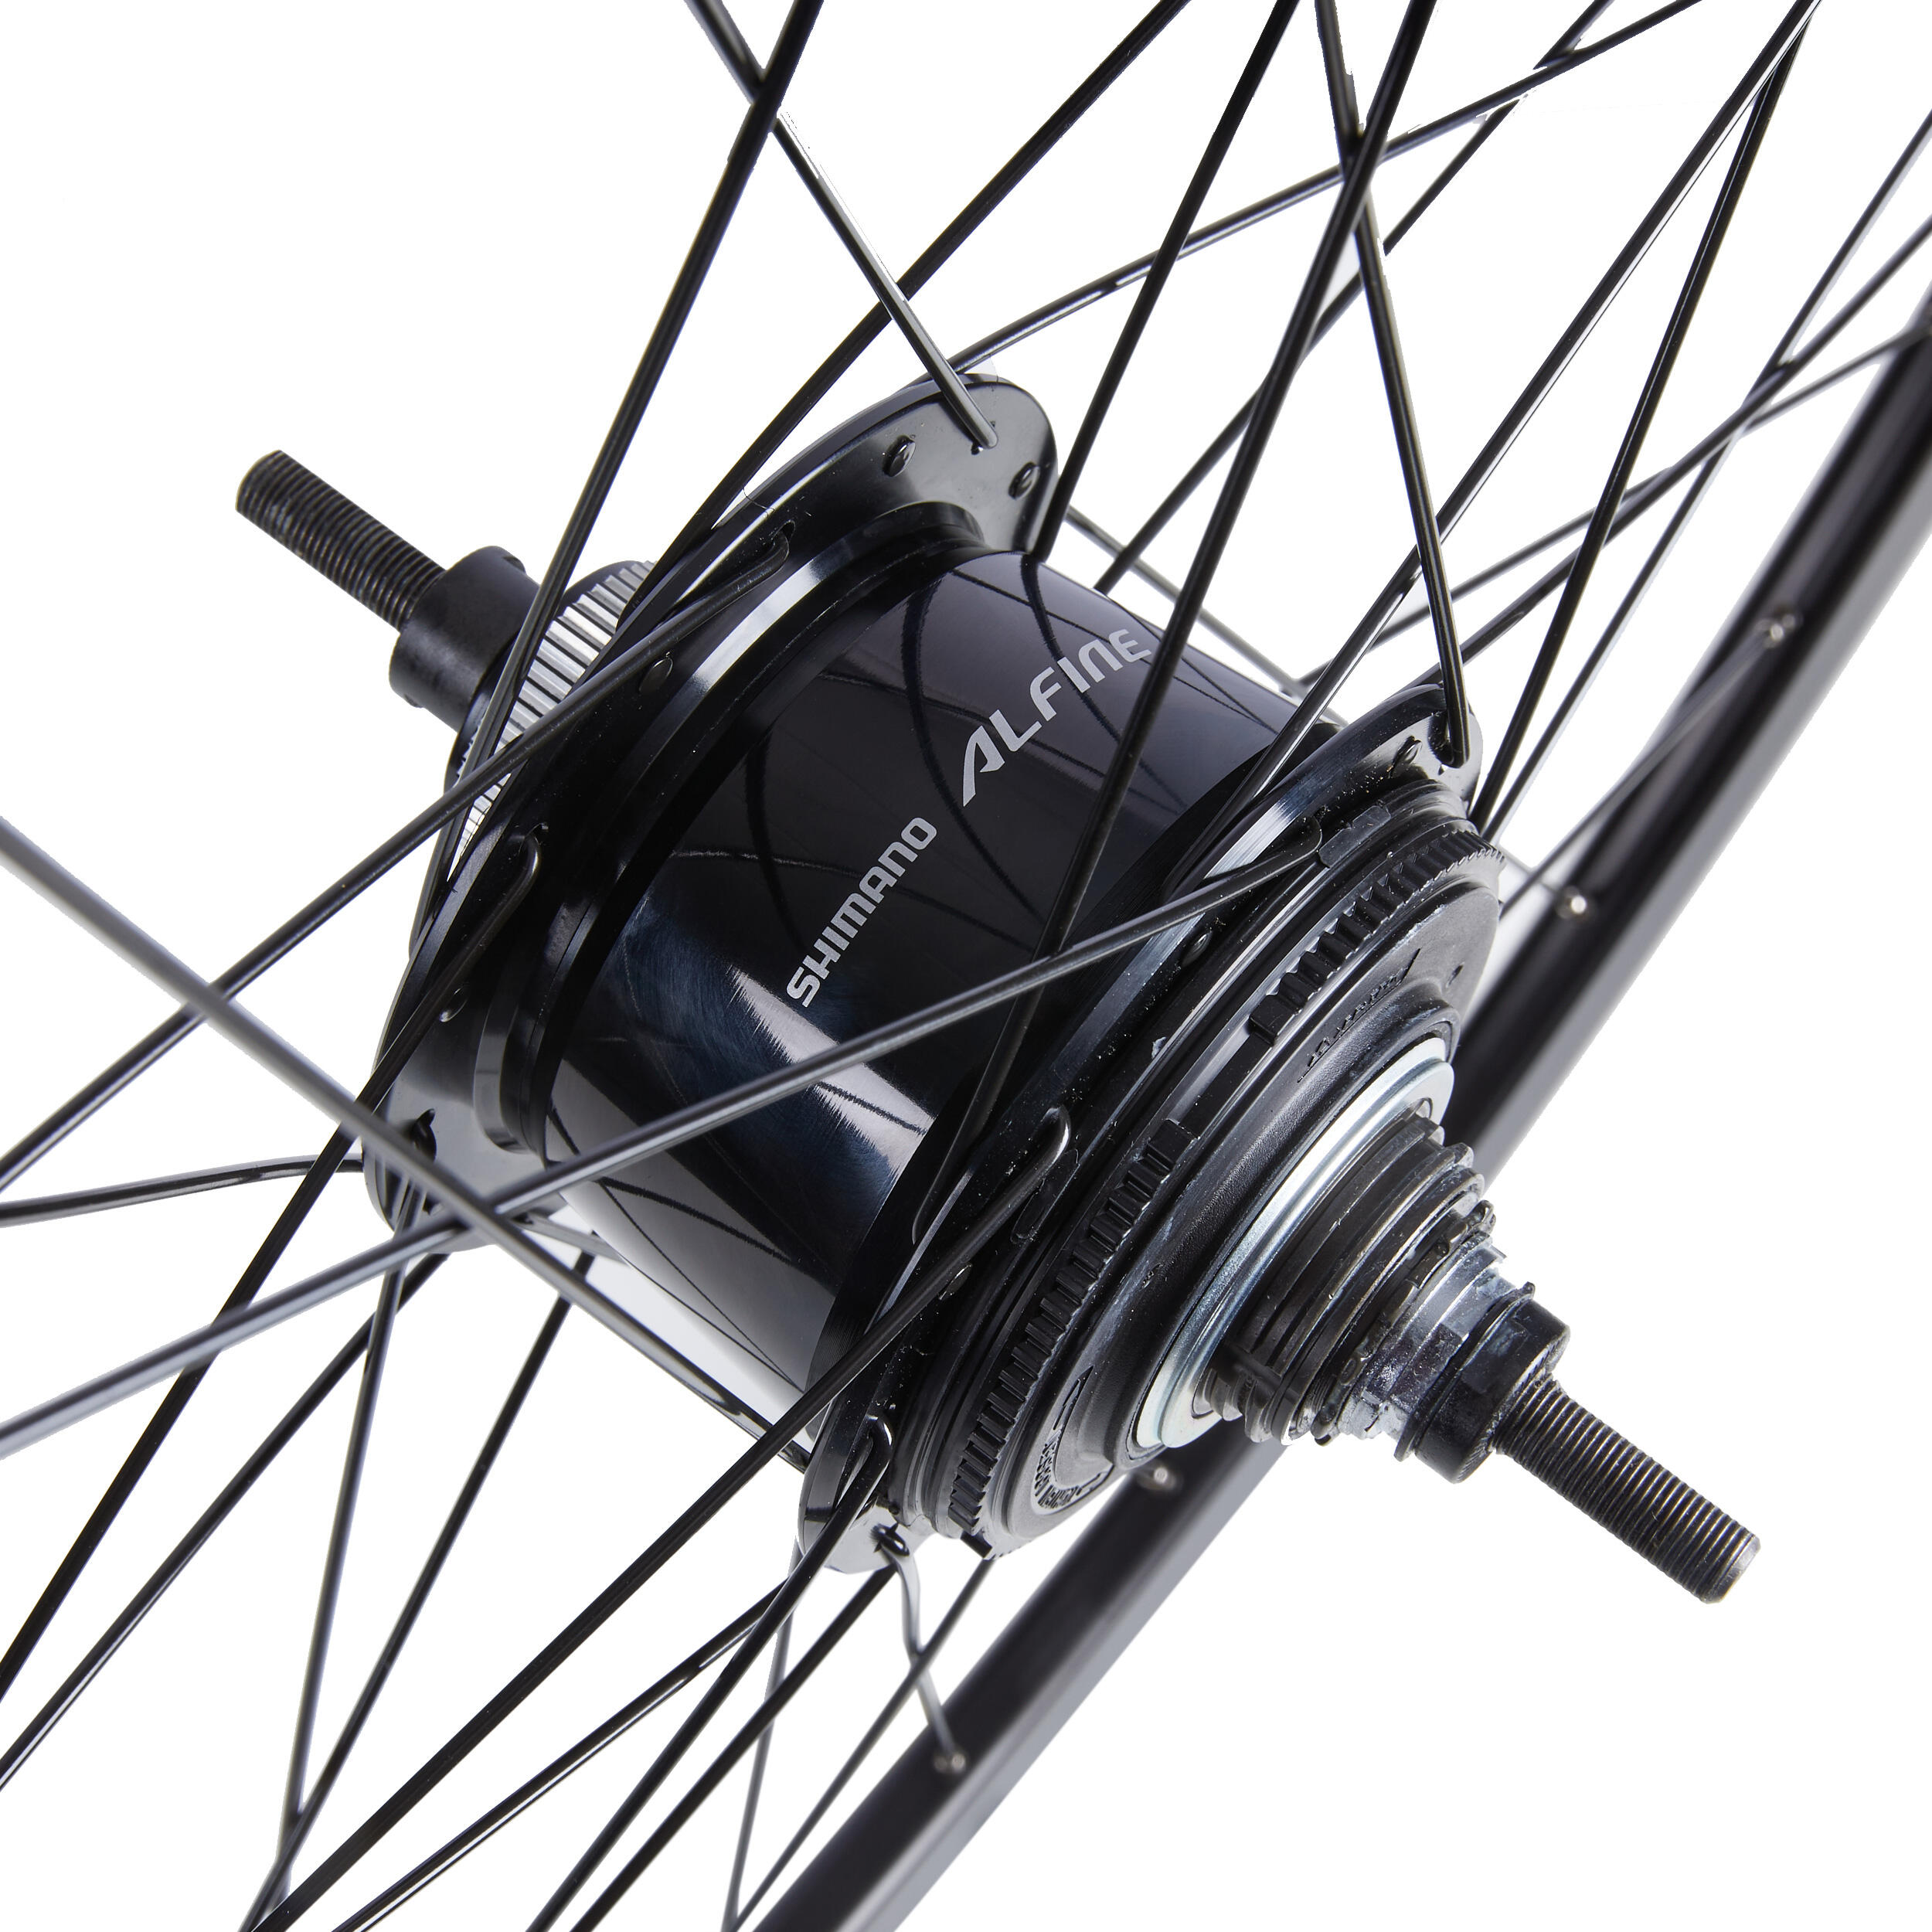 Double-Walled Rear Wheel With Disc Wheelset For Speed 920 City Bike 2/3